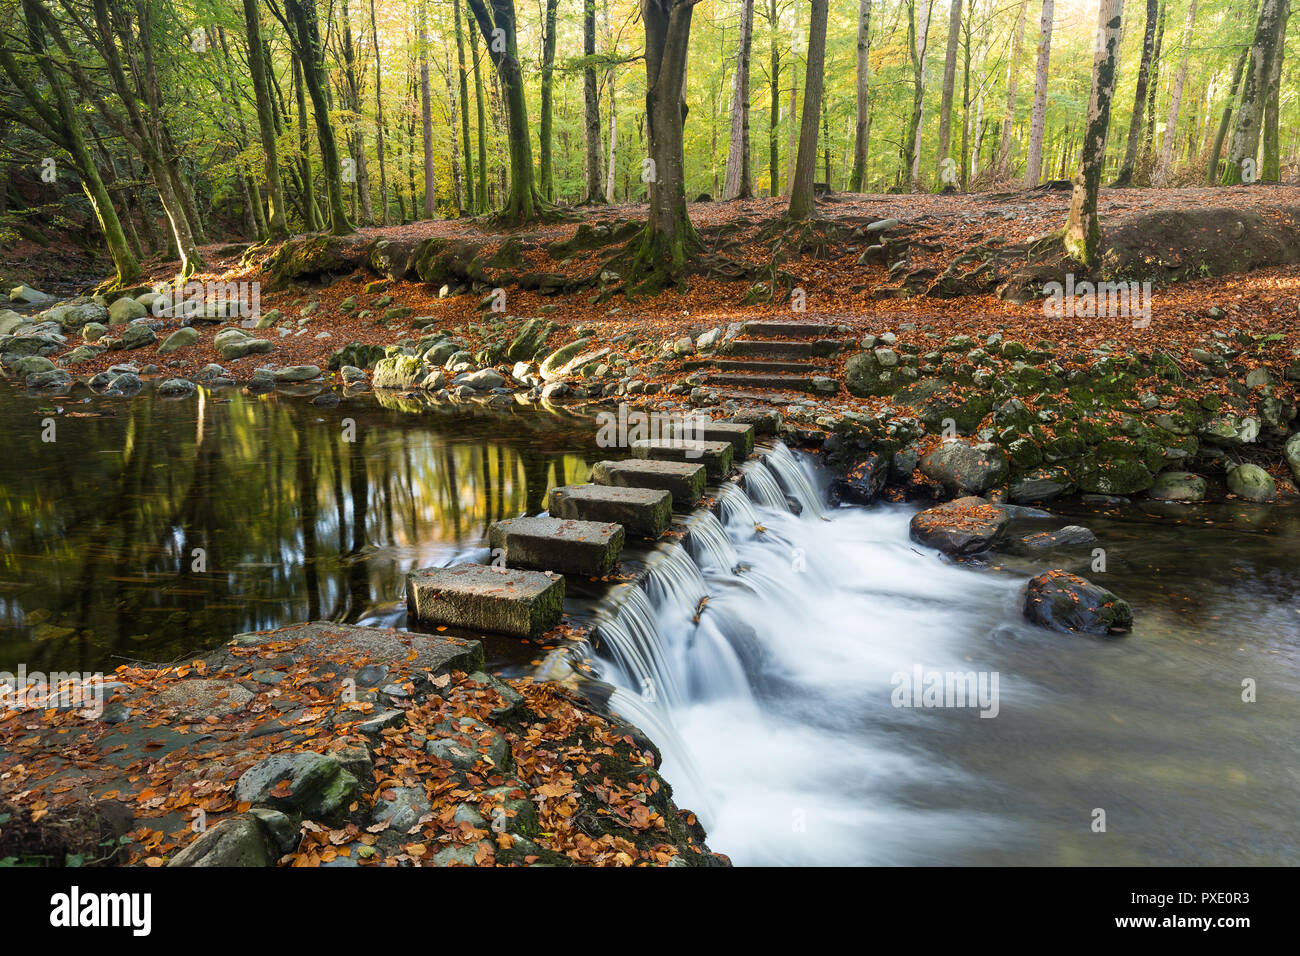 Newcastle,  N.Ireland, 21st October, 2018. UK Weather: Sunny intervals in the afternoon after a grey wet morning.  Lovely afternoon for a walk around Tollymore Forest Park to enjoy the autumn colours. Stepping stones over the River Shimna. Credit: Ian Proctor/Alamy Live News Stock Photo